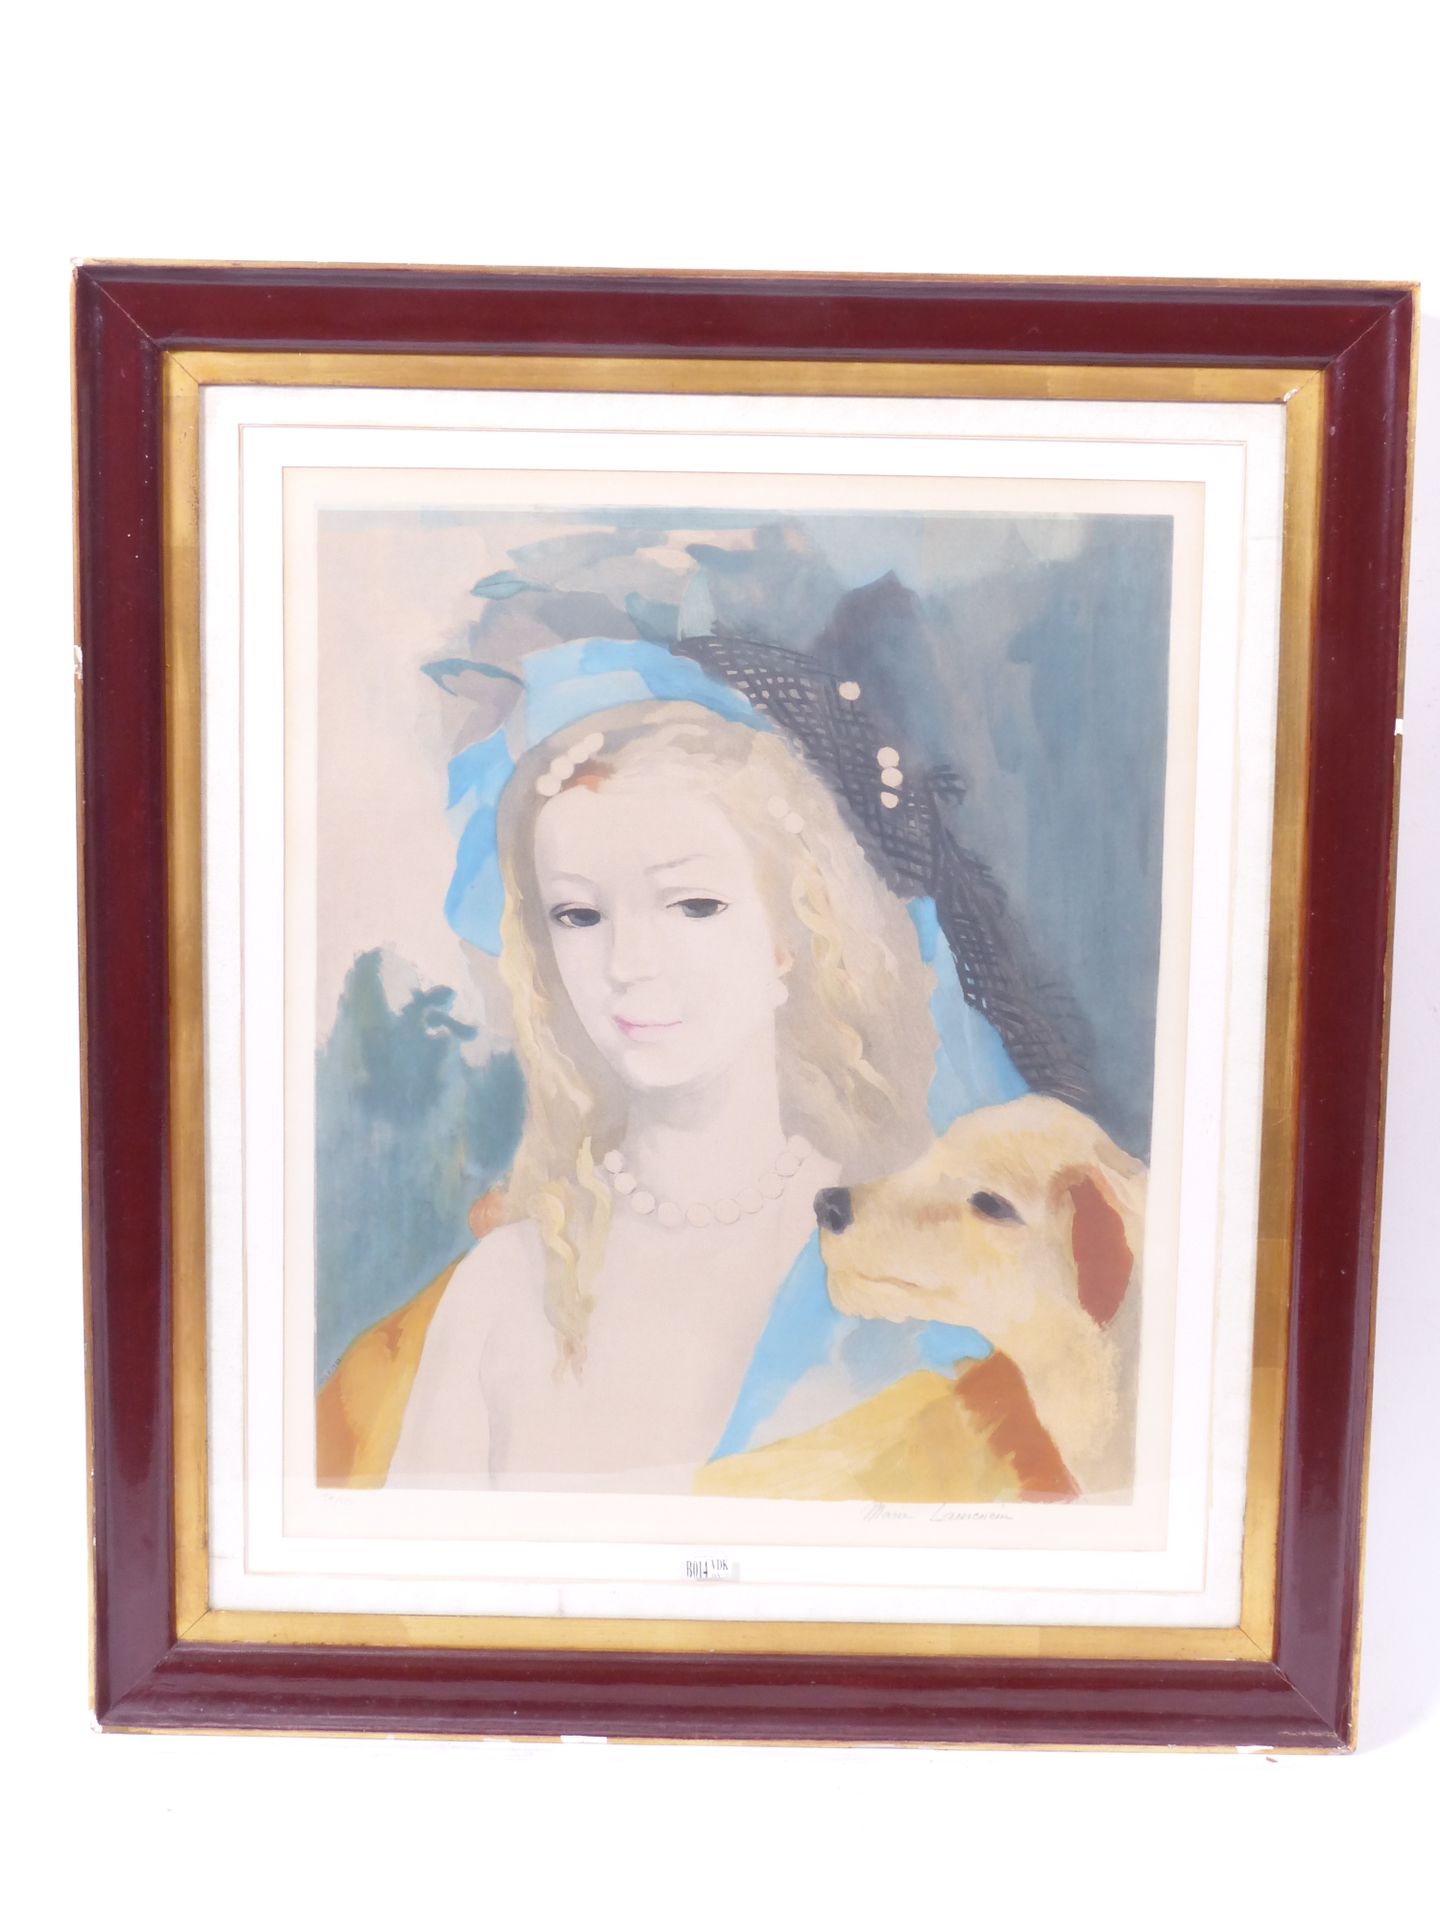 Null A lithograph. Signed Marie-Laurencin, print 14/50. Size: 55x46 cm.